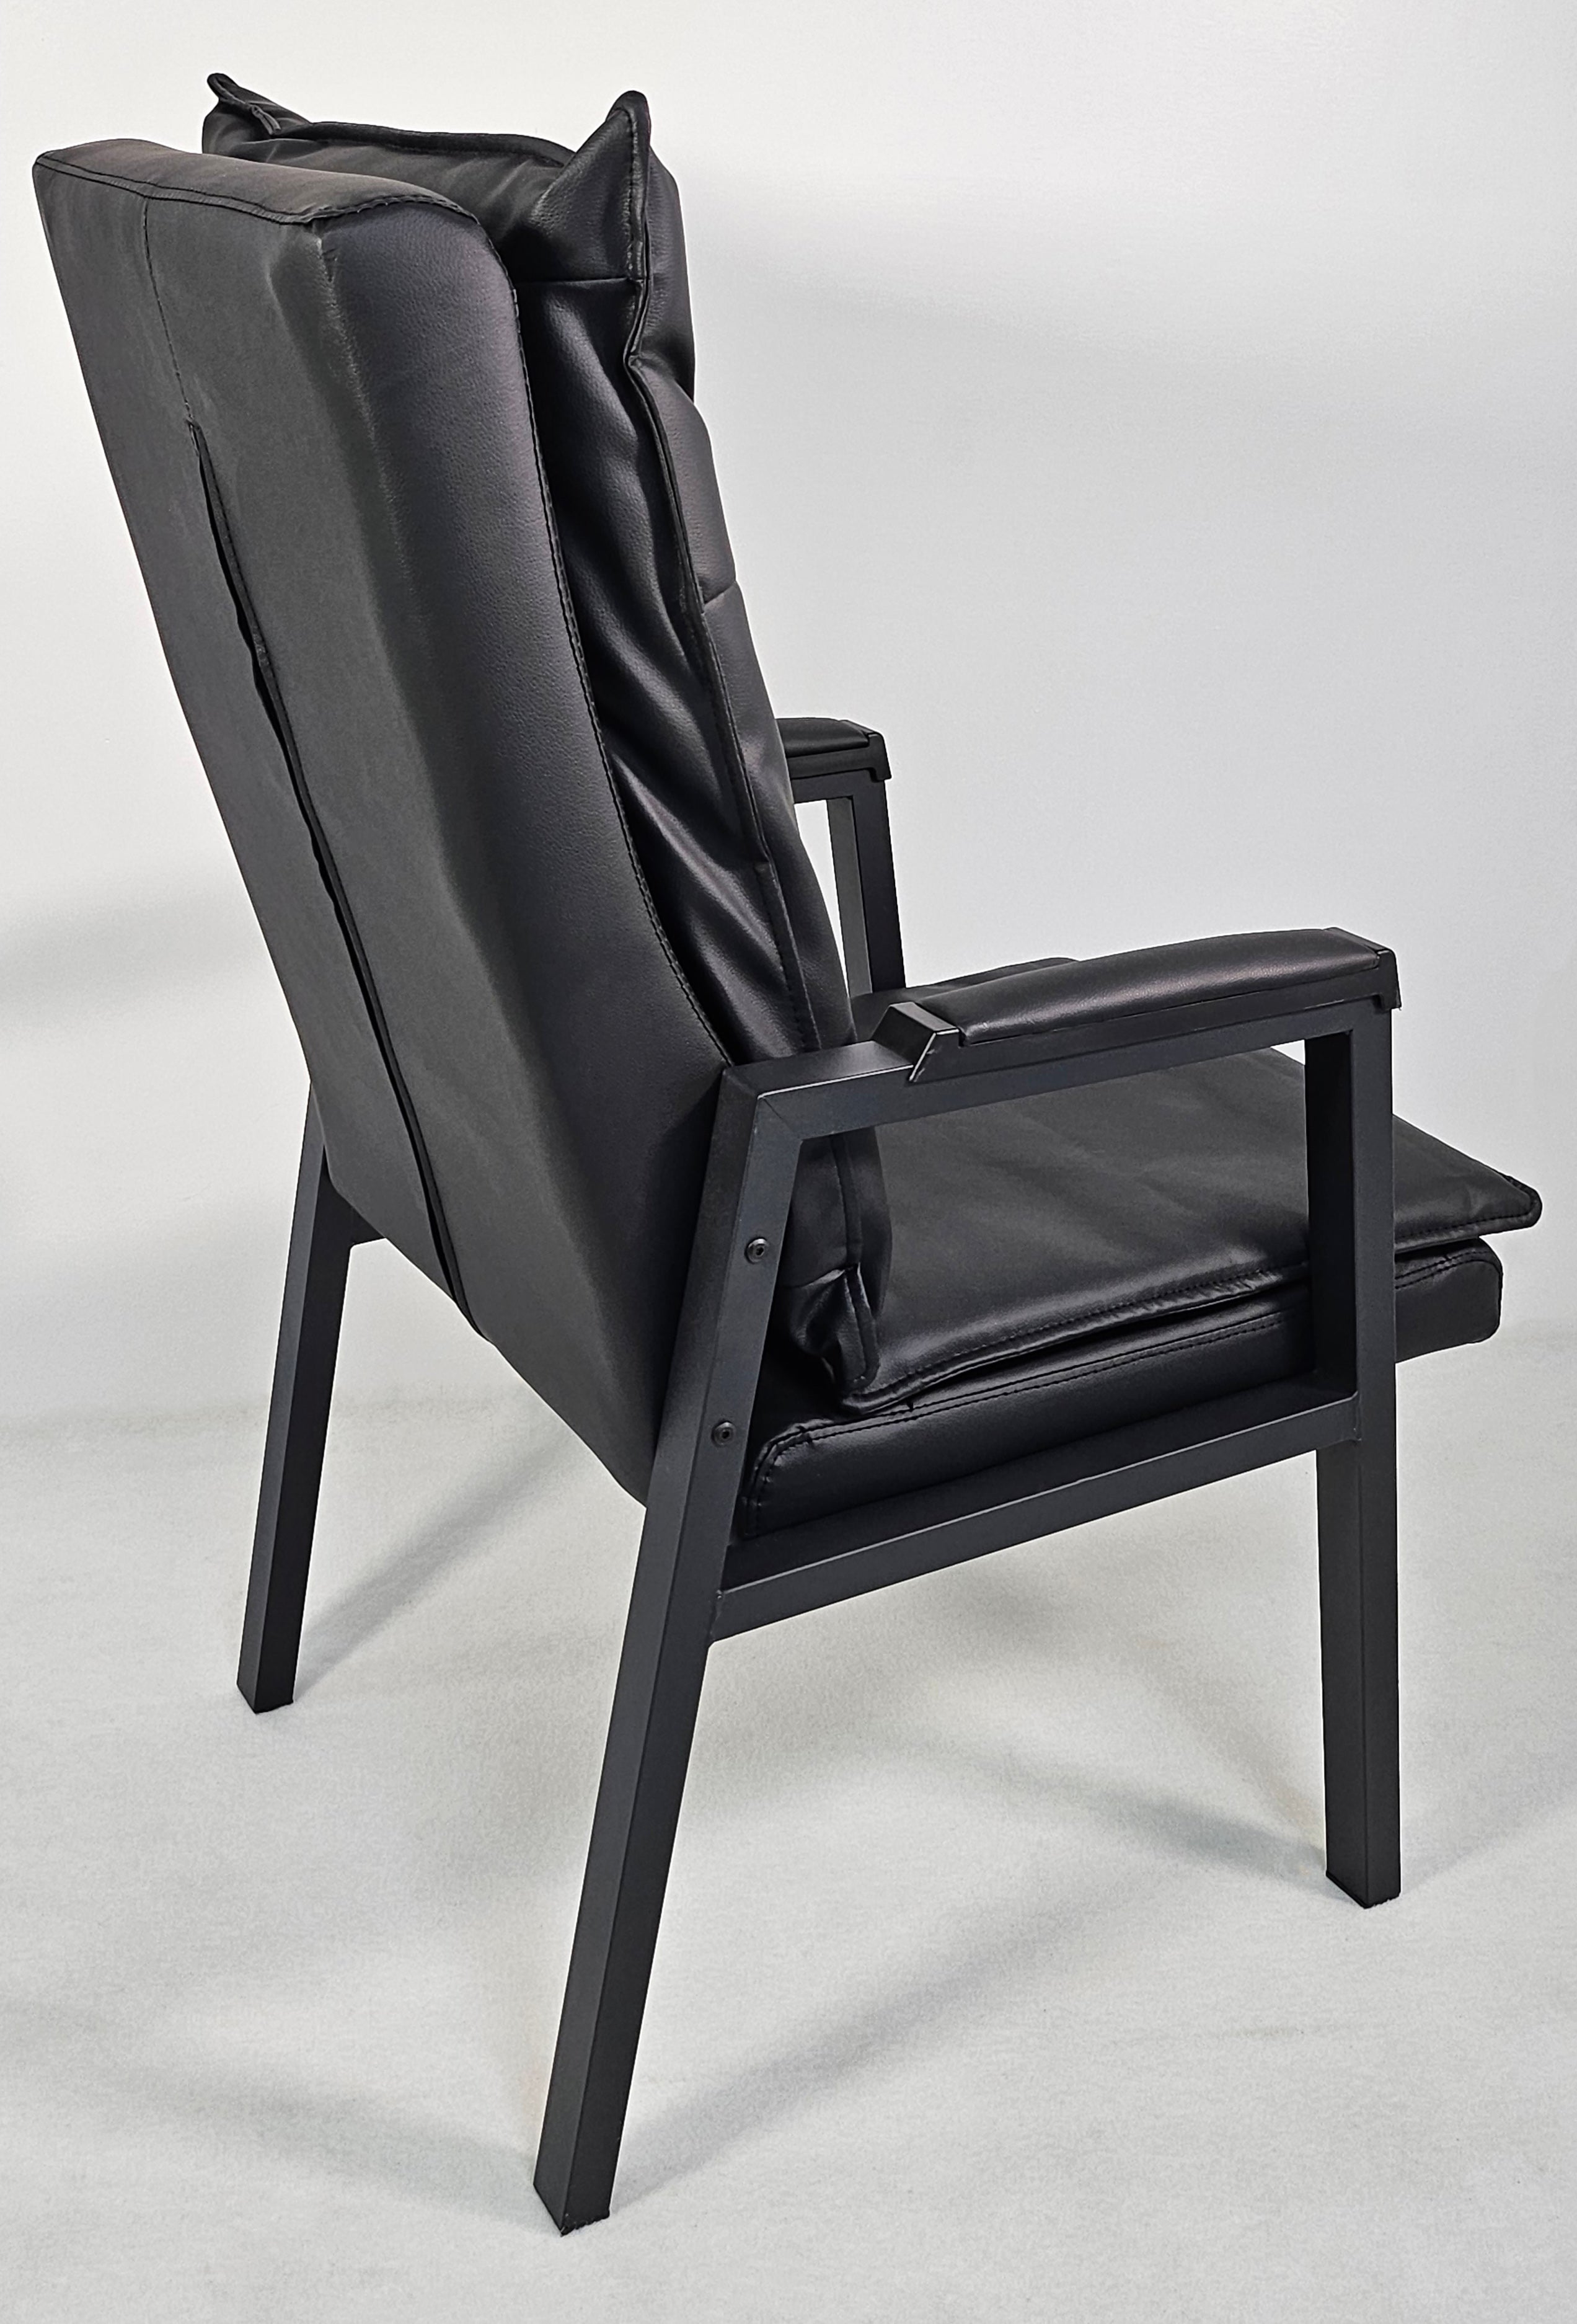 Black Leather Visitor Chair with Steel Frame - 012